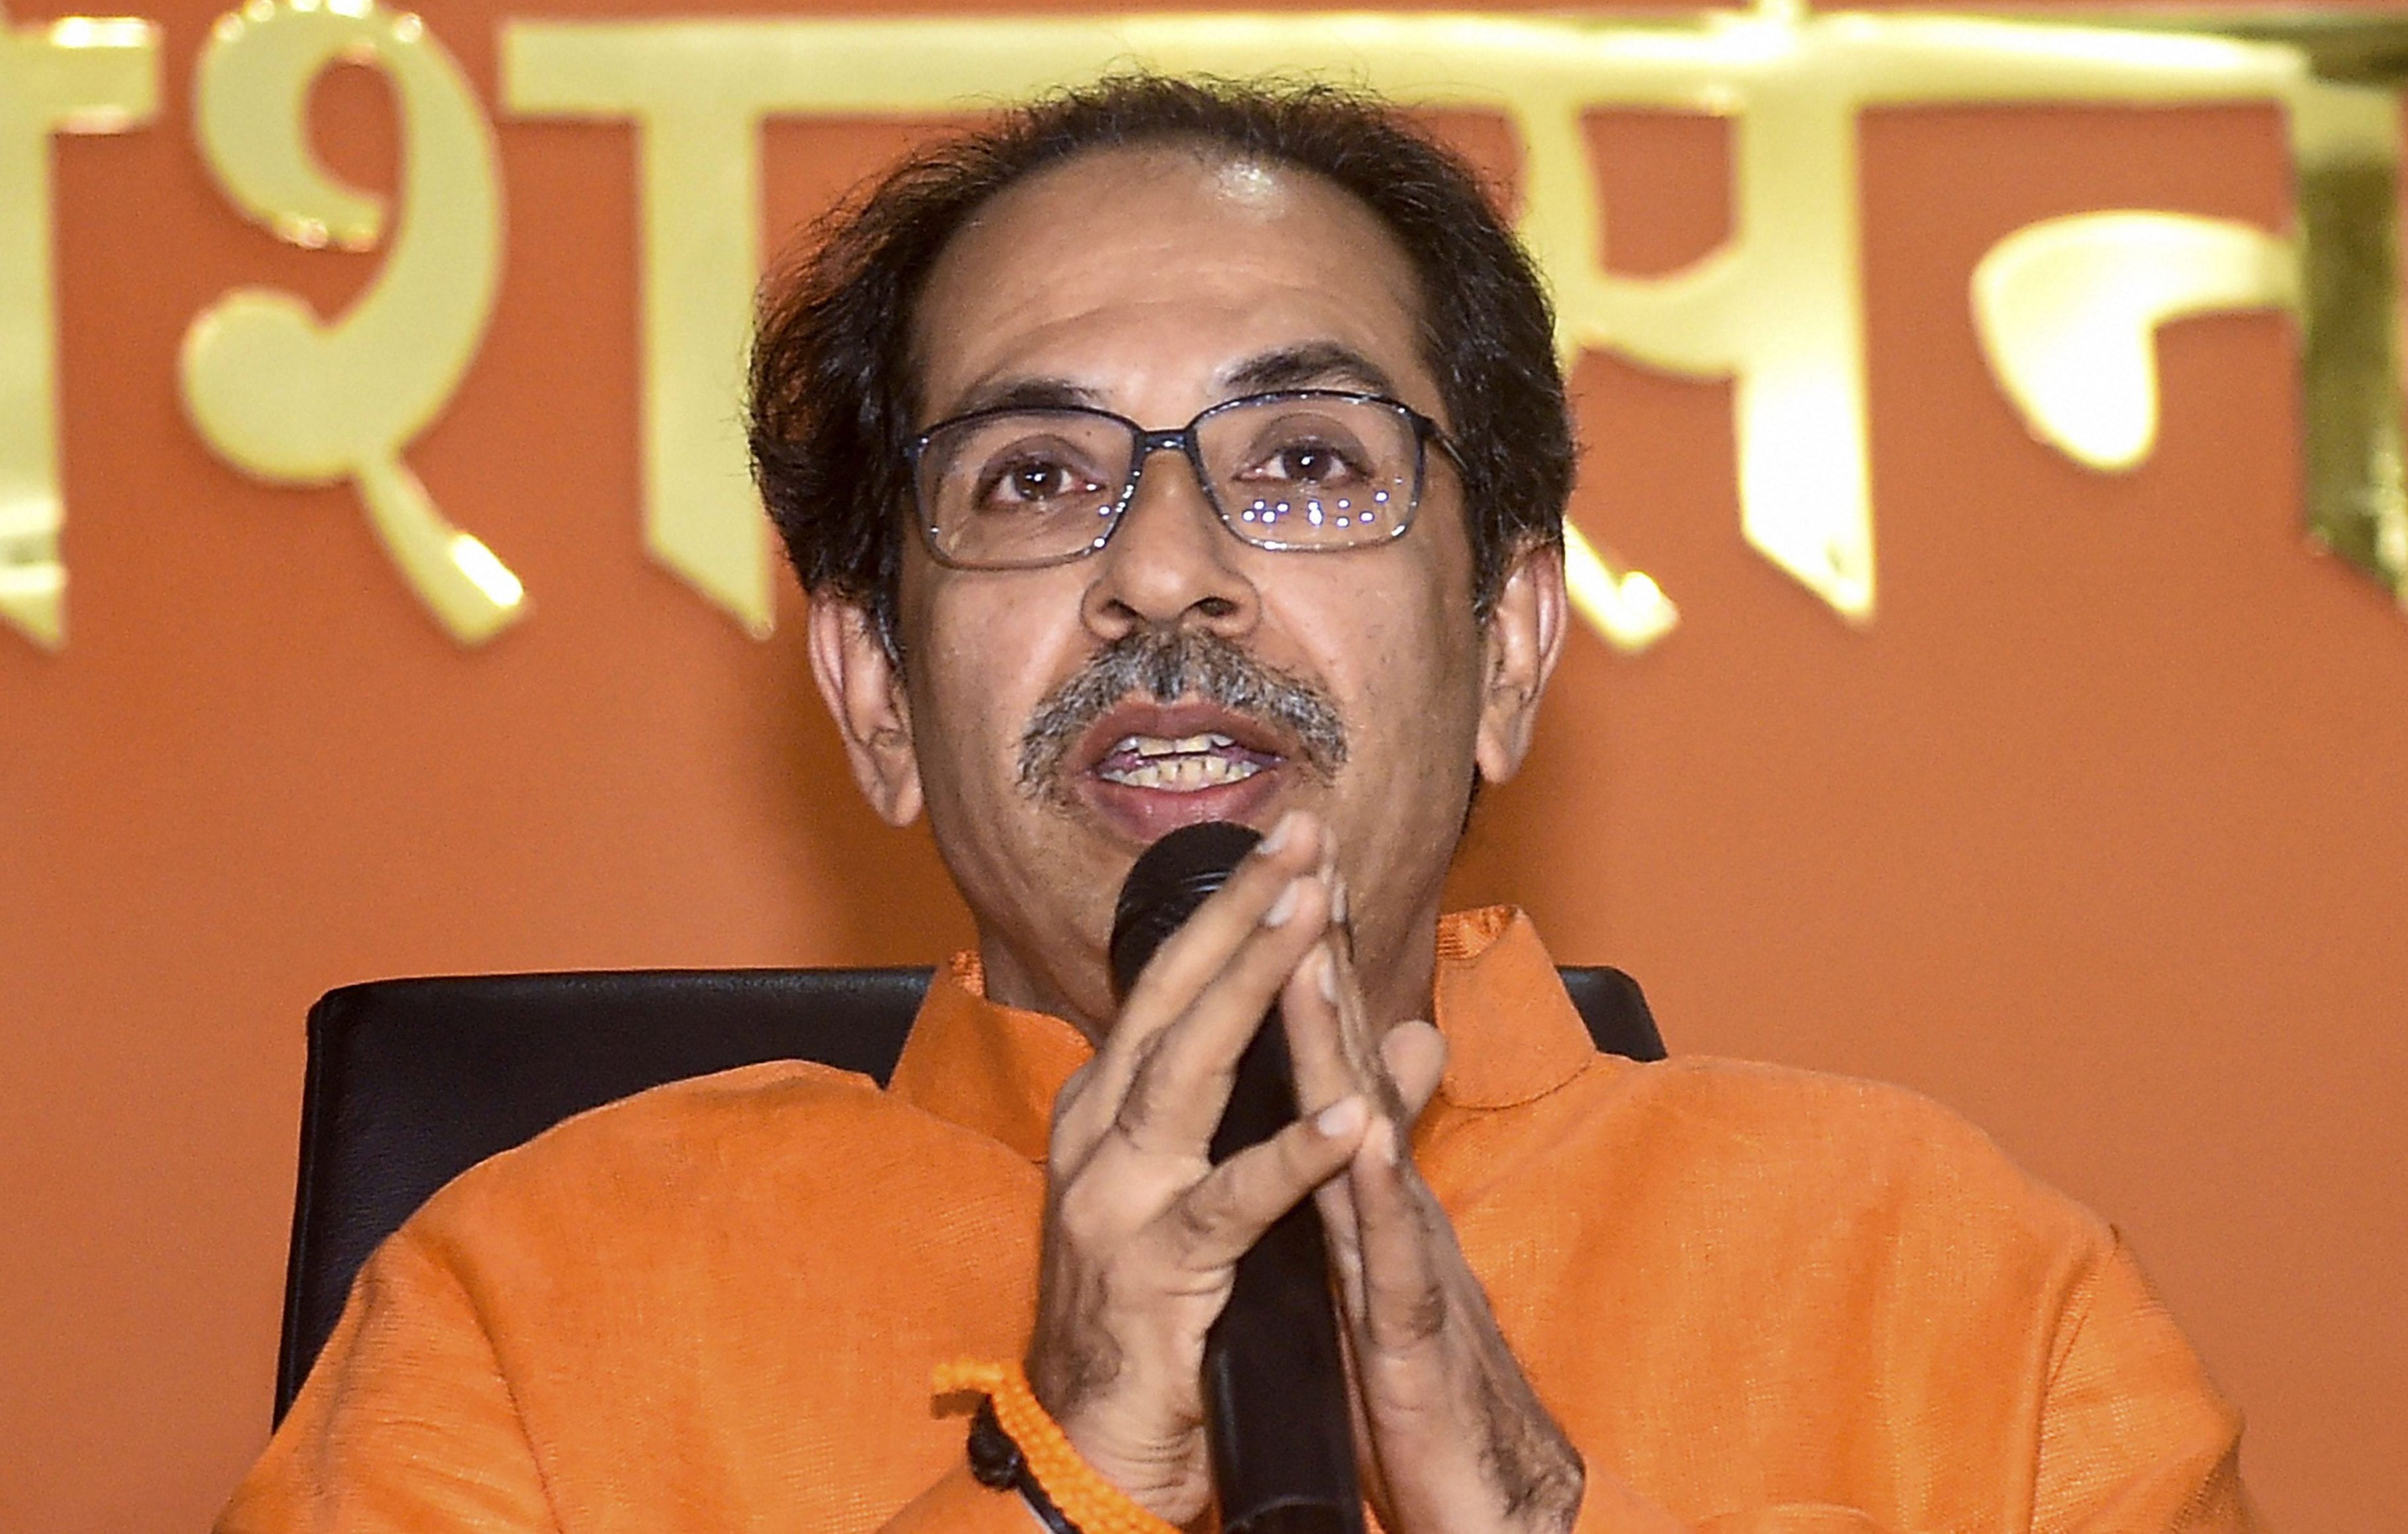 Feel bad we entered into an alliance with wrong people: Uddhav Thackeray